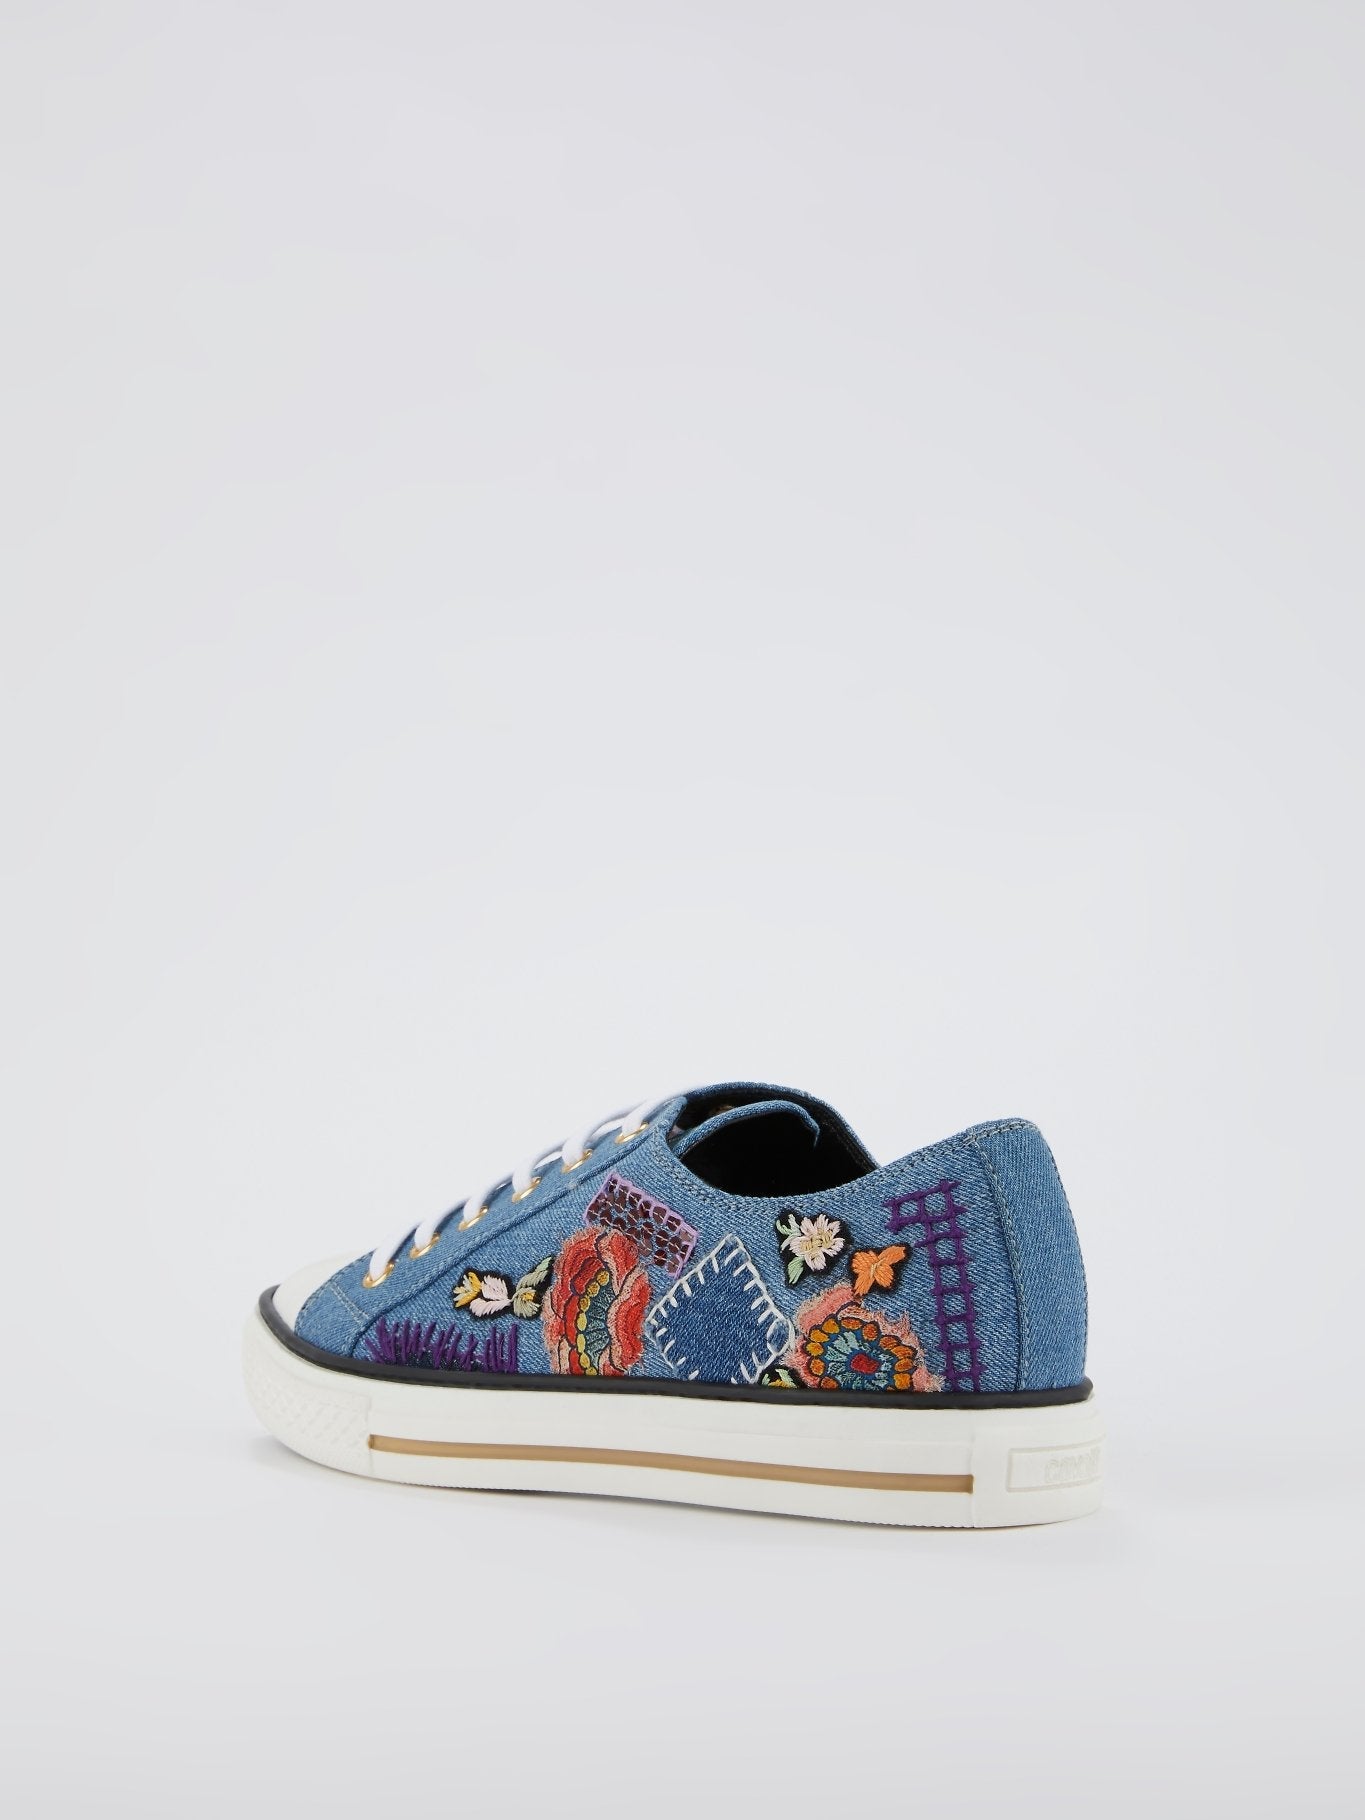 Blue Embroidered Denim Sneakers